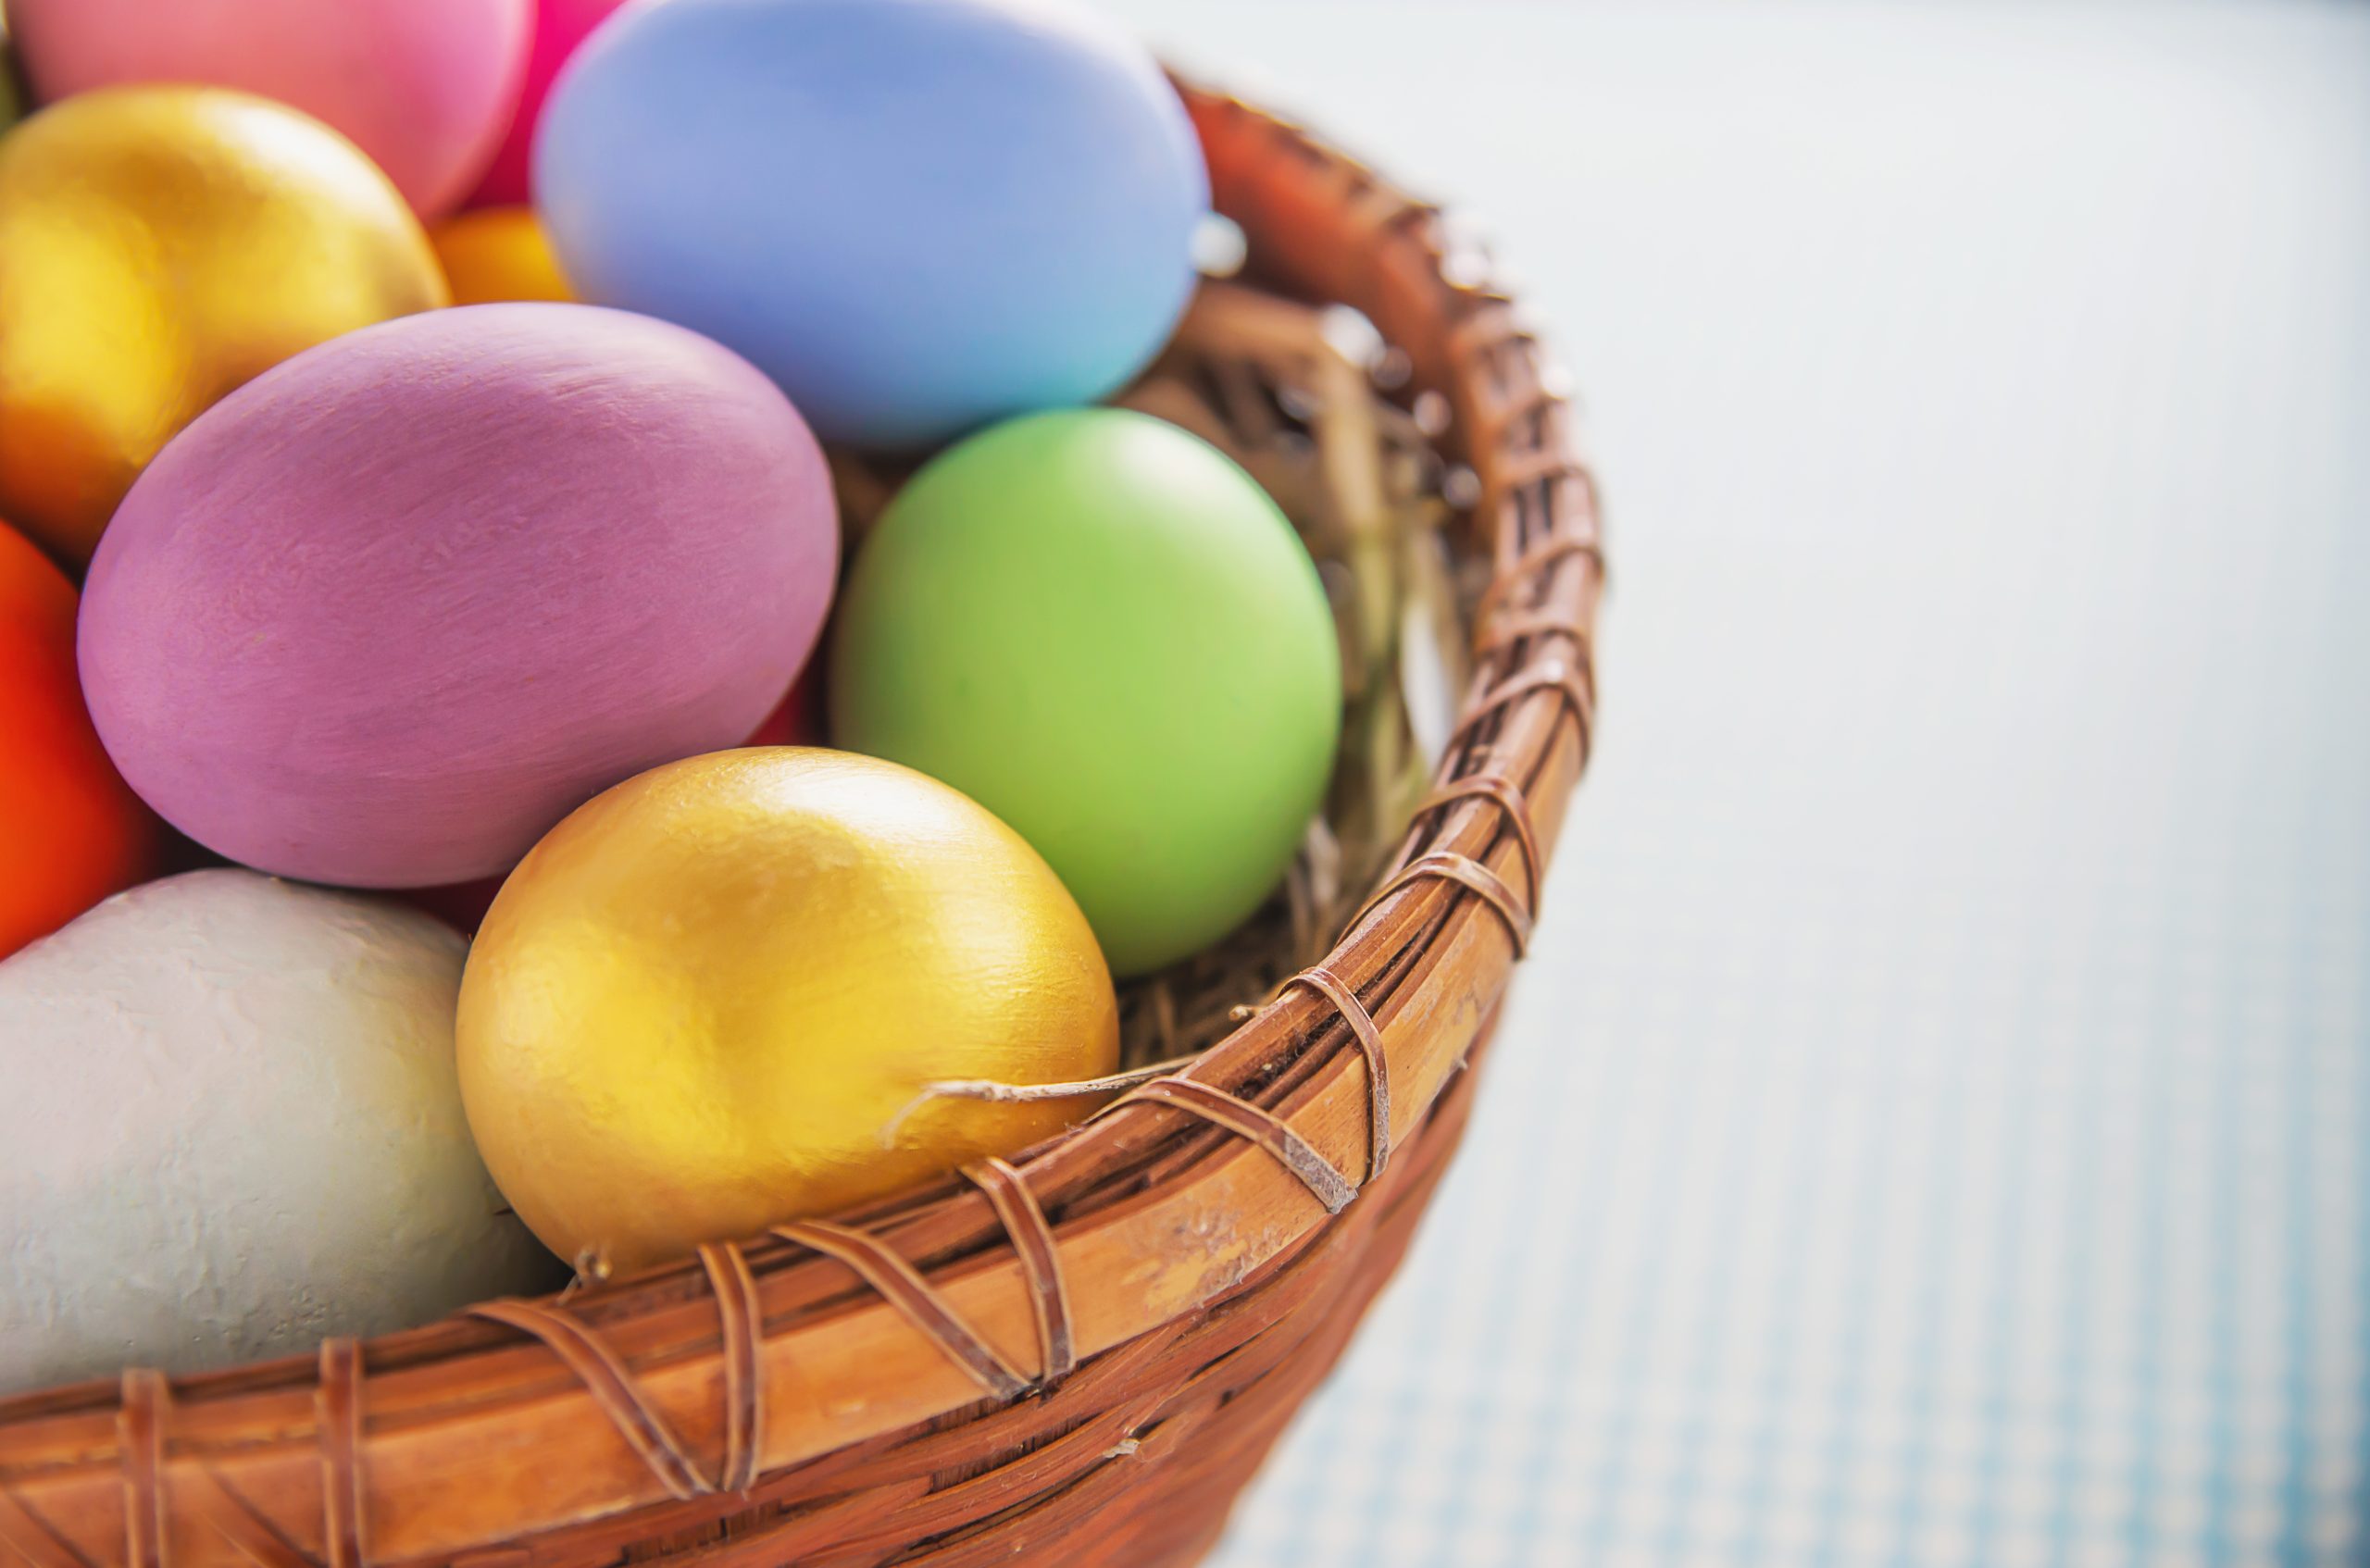 Sweet colorful Easter eggs background - national holiday celebration concepts